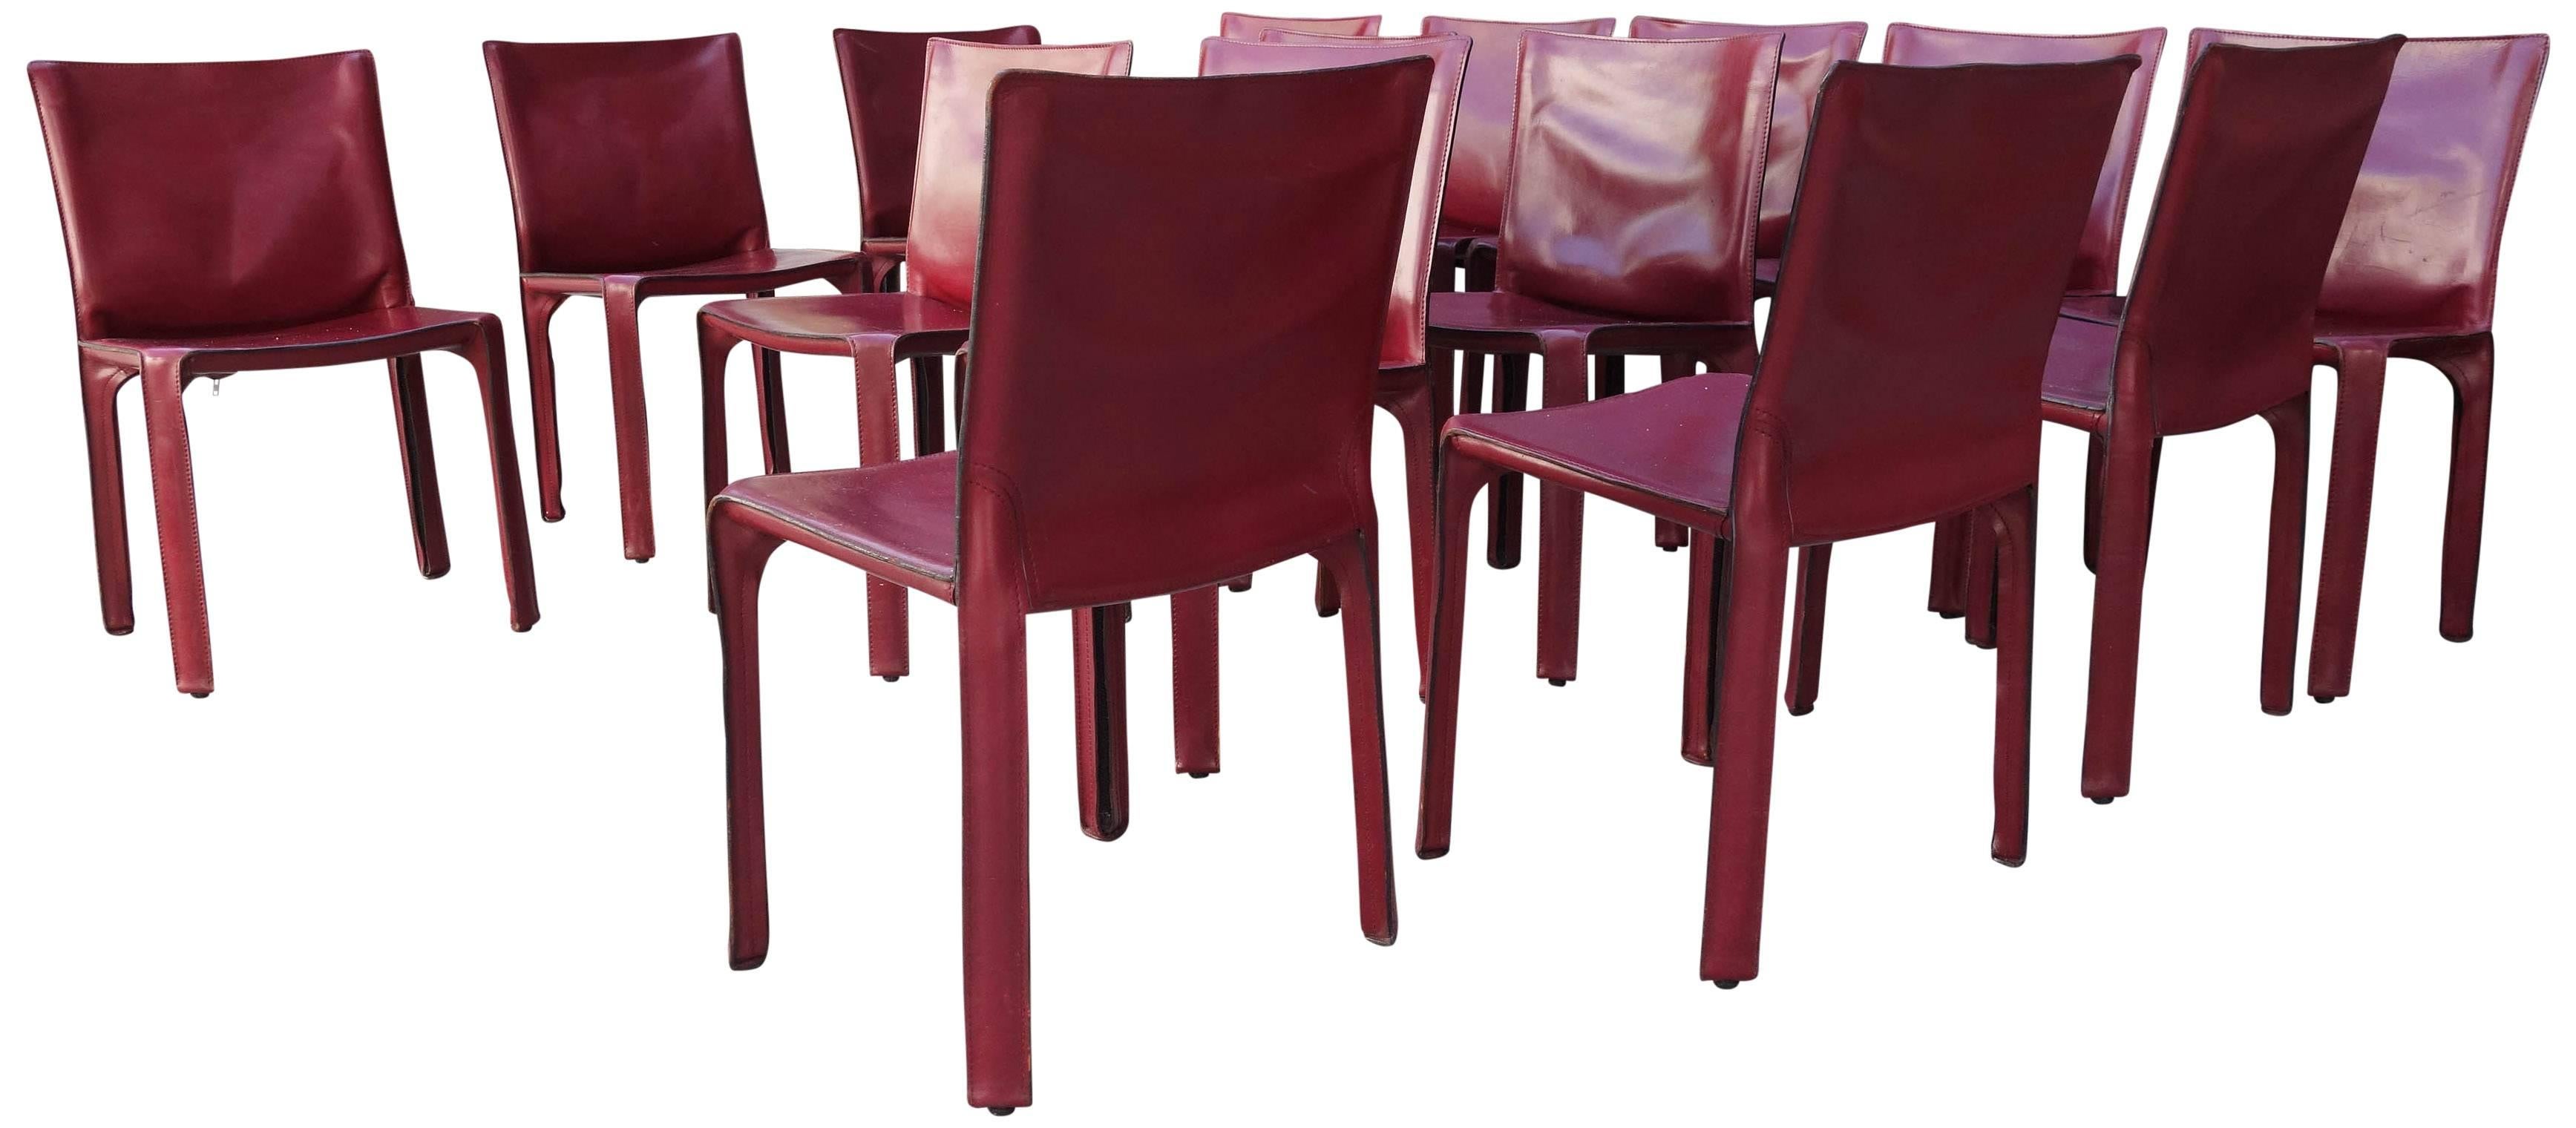 Midcentury Cassina Cab Chairs by Mario Bellini 2